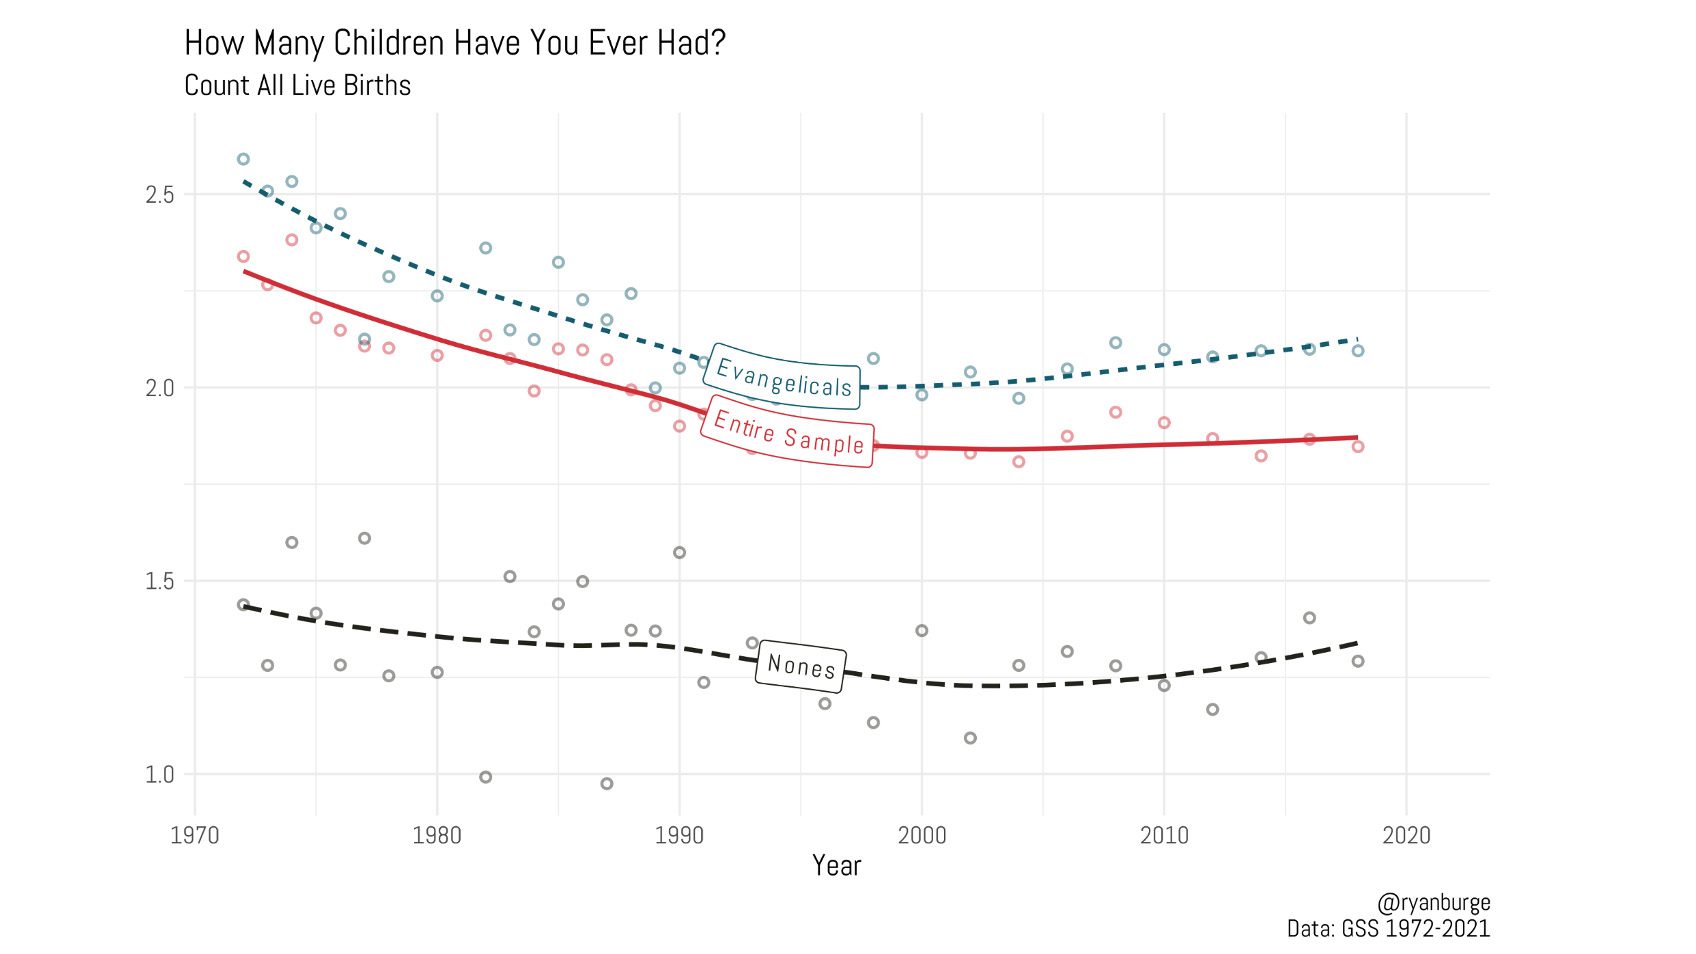 "How Many Children Have You Ever Had?" Graphic courtesy of Ryan Burge